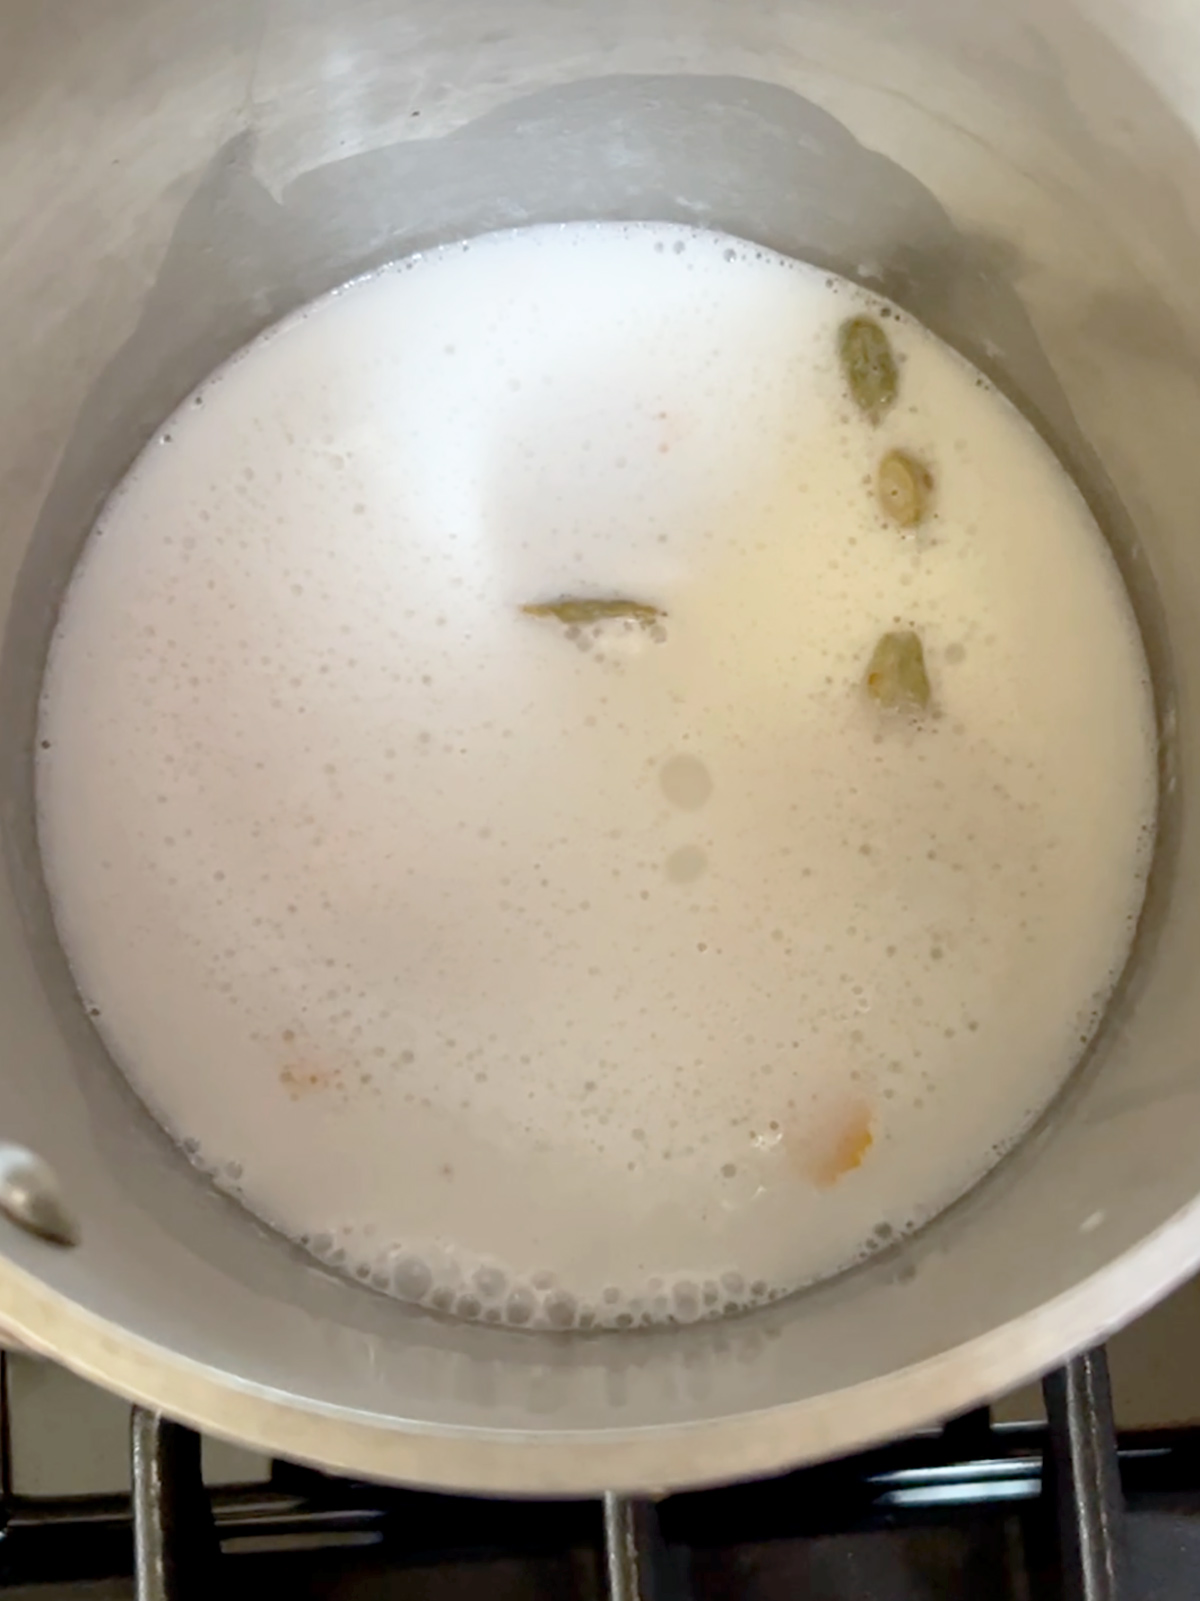 Coconut cream and cardamom and orange zest boiling in a small pot.